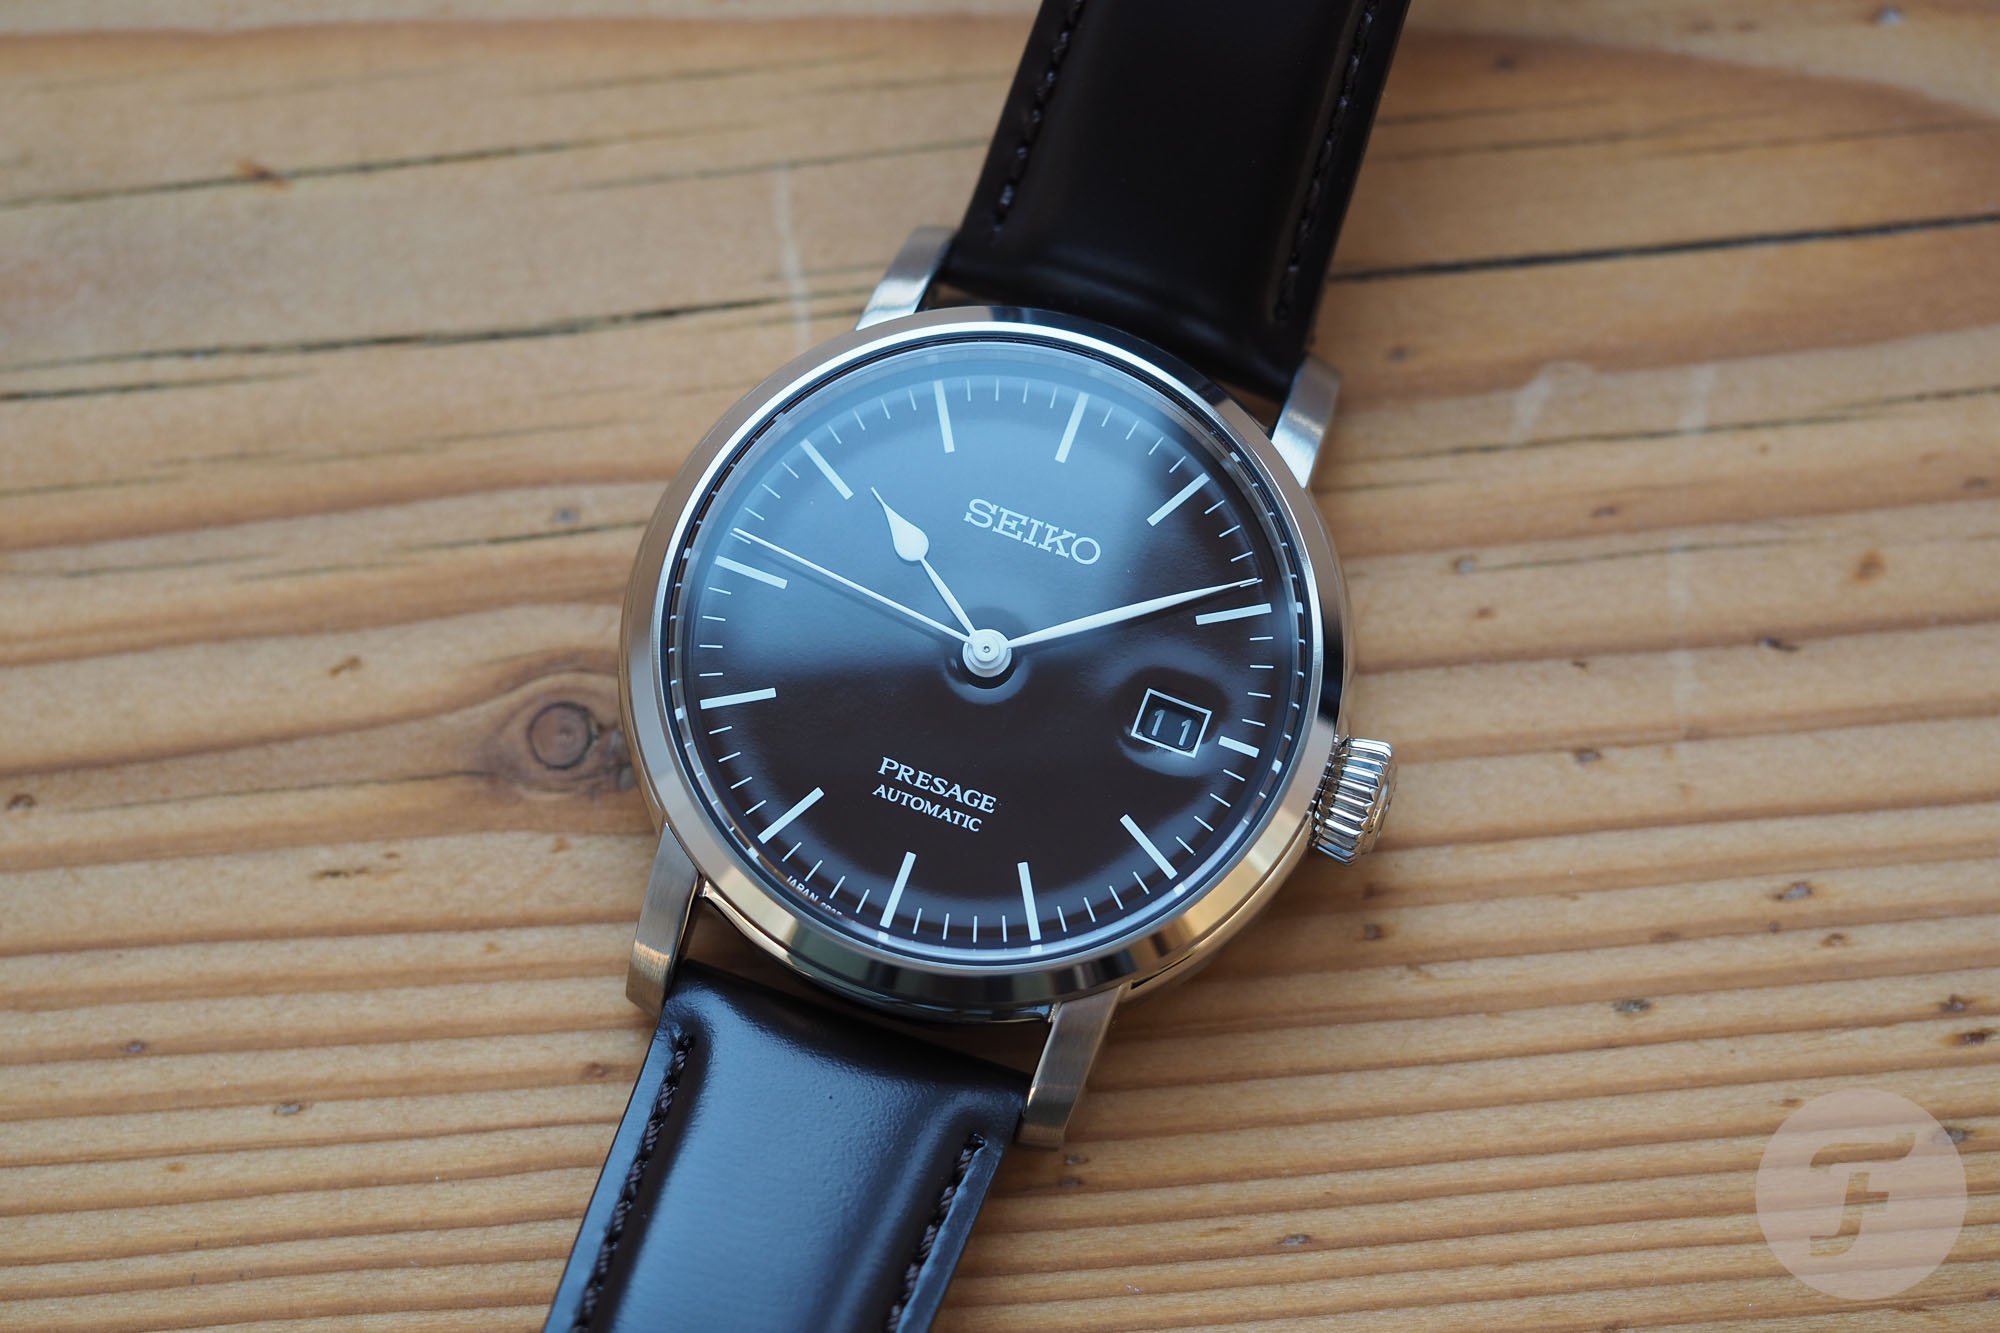 Hands-On With The Seiko Presage Automatic Enamel Dial Watch